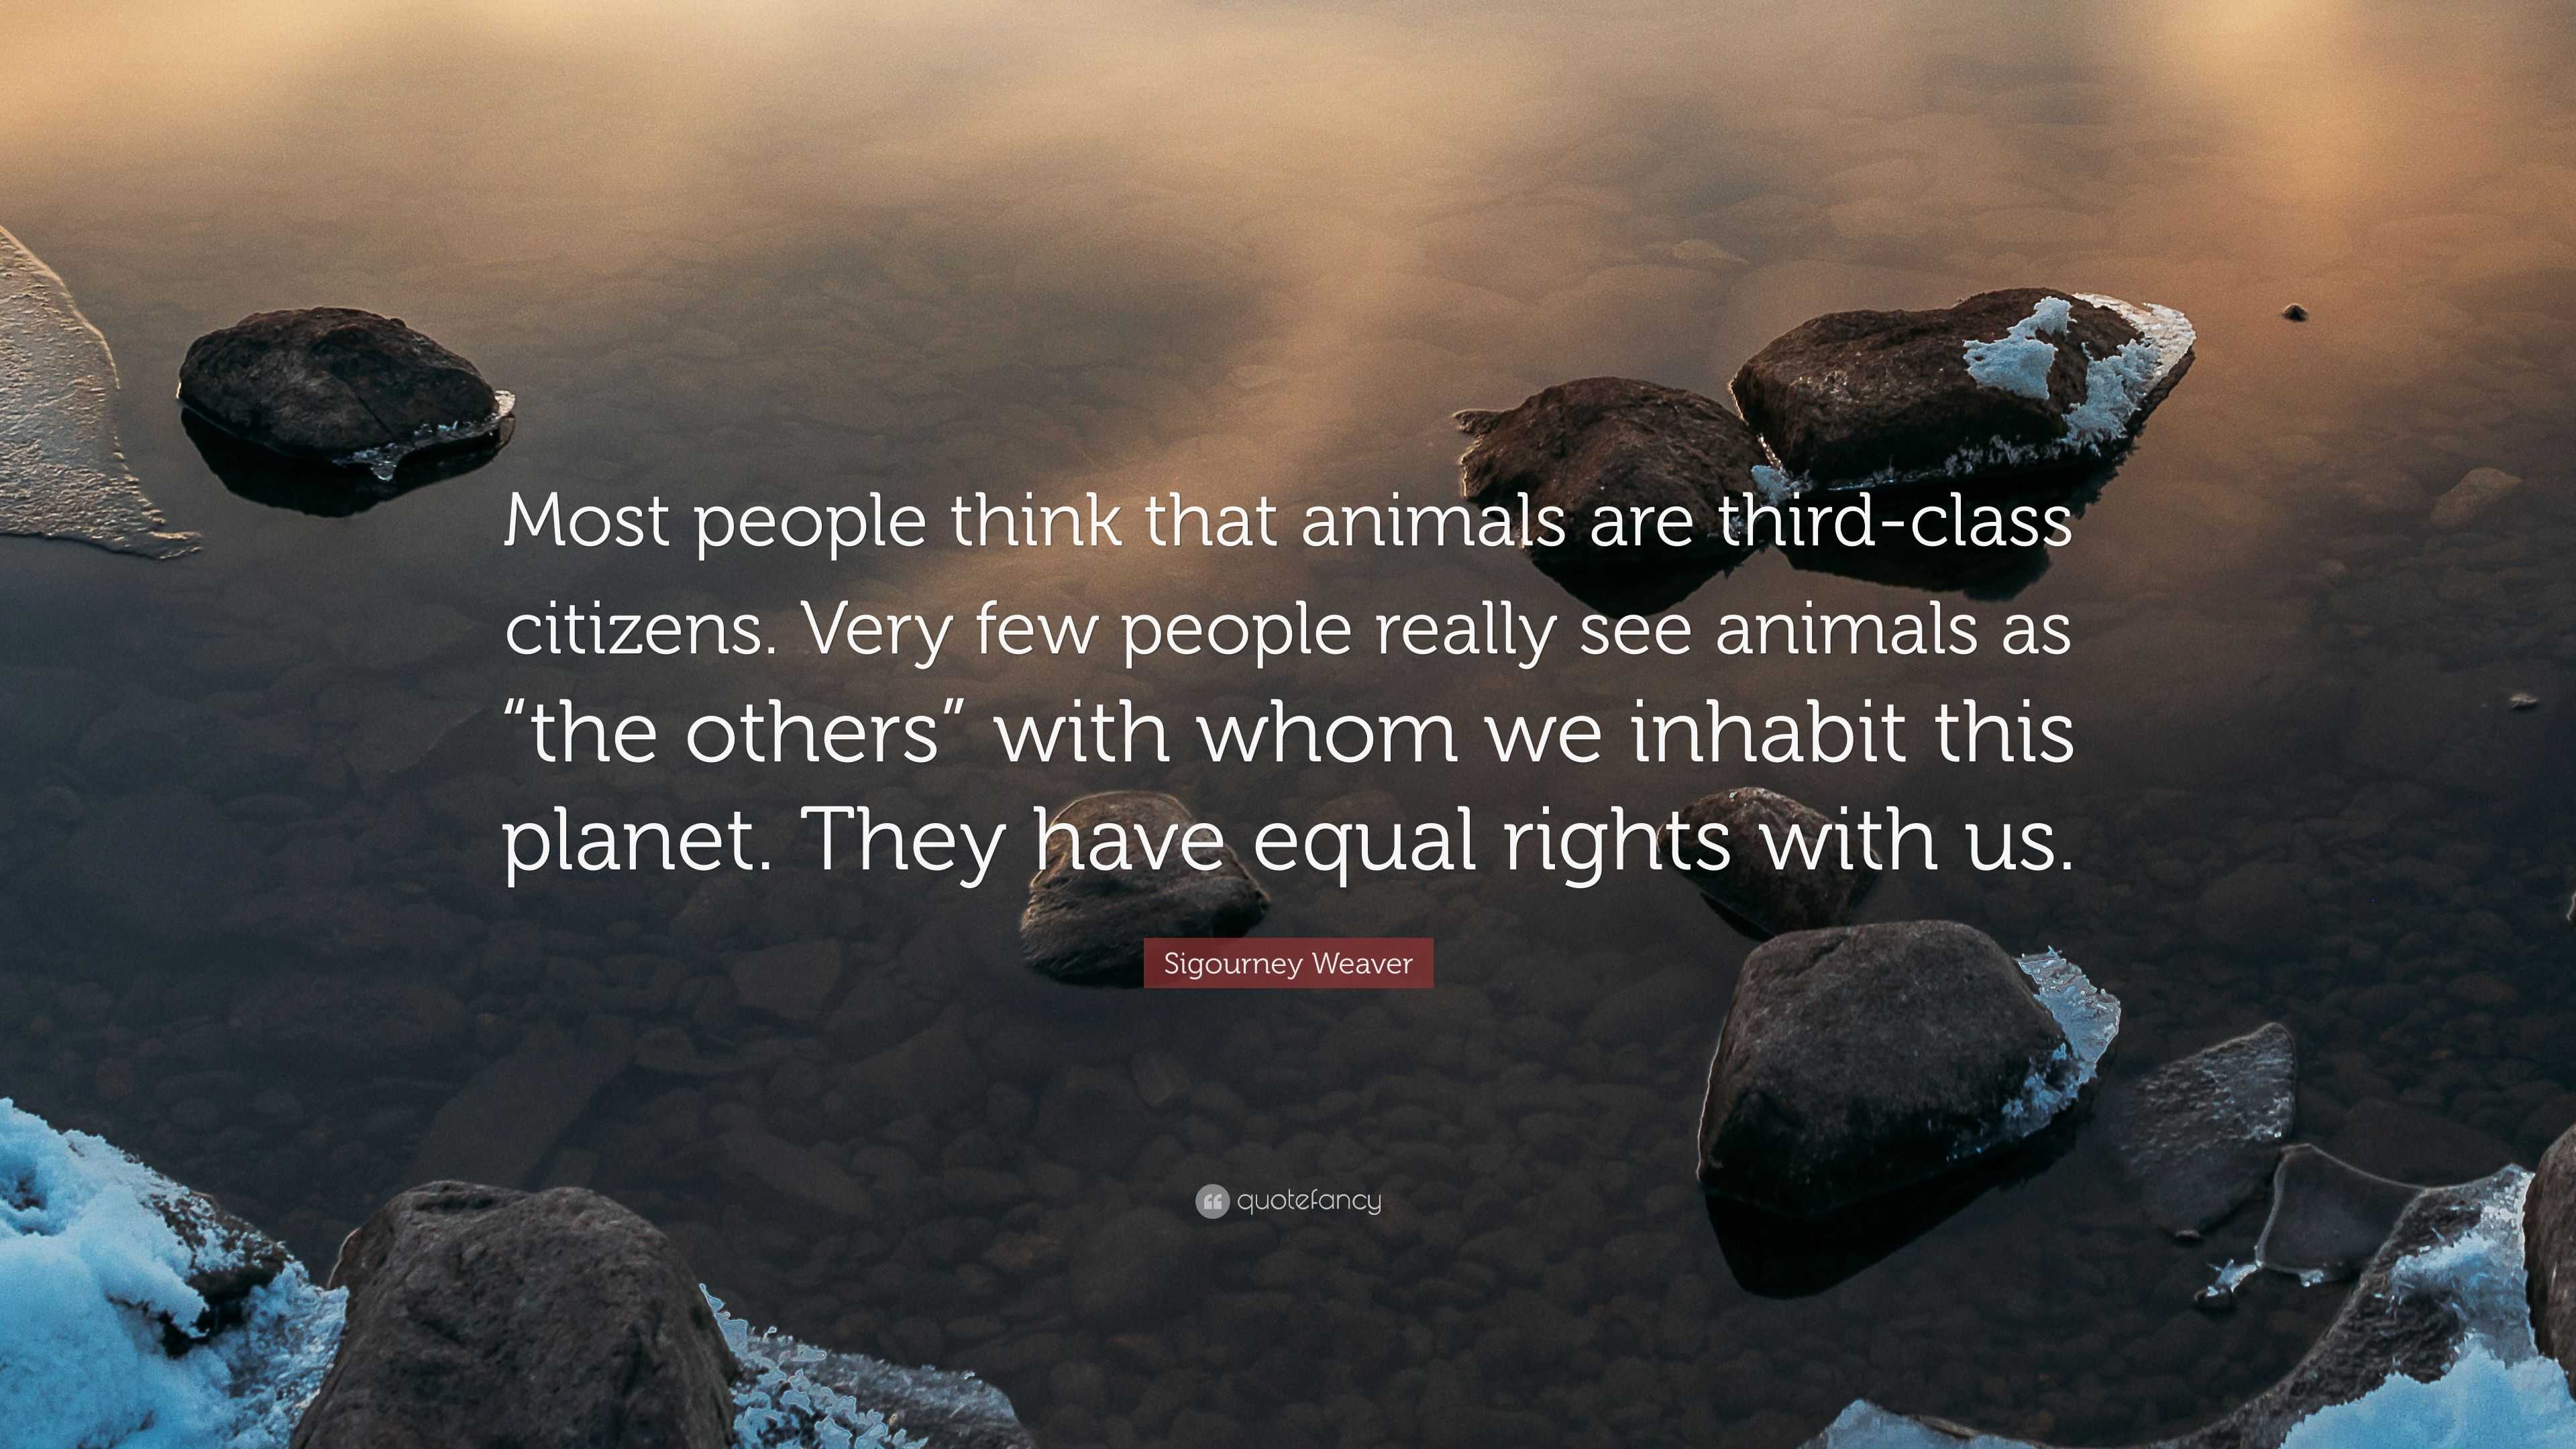 Sigourney Weaver Quote: “Most people think that animals are third-class  citizens. Very few people really see animals as “the others” with whom  we...”